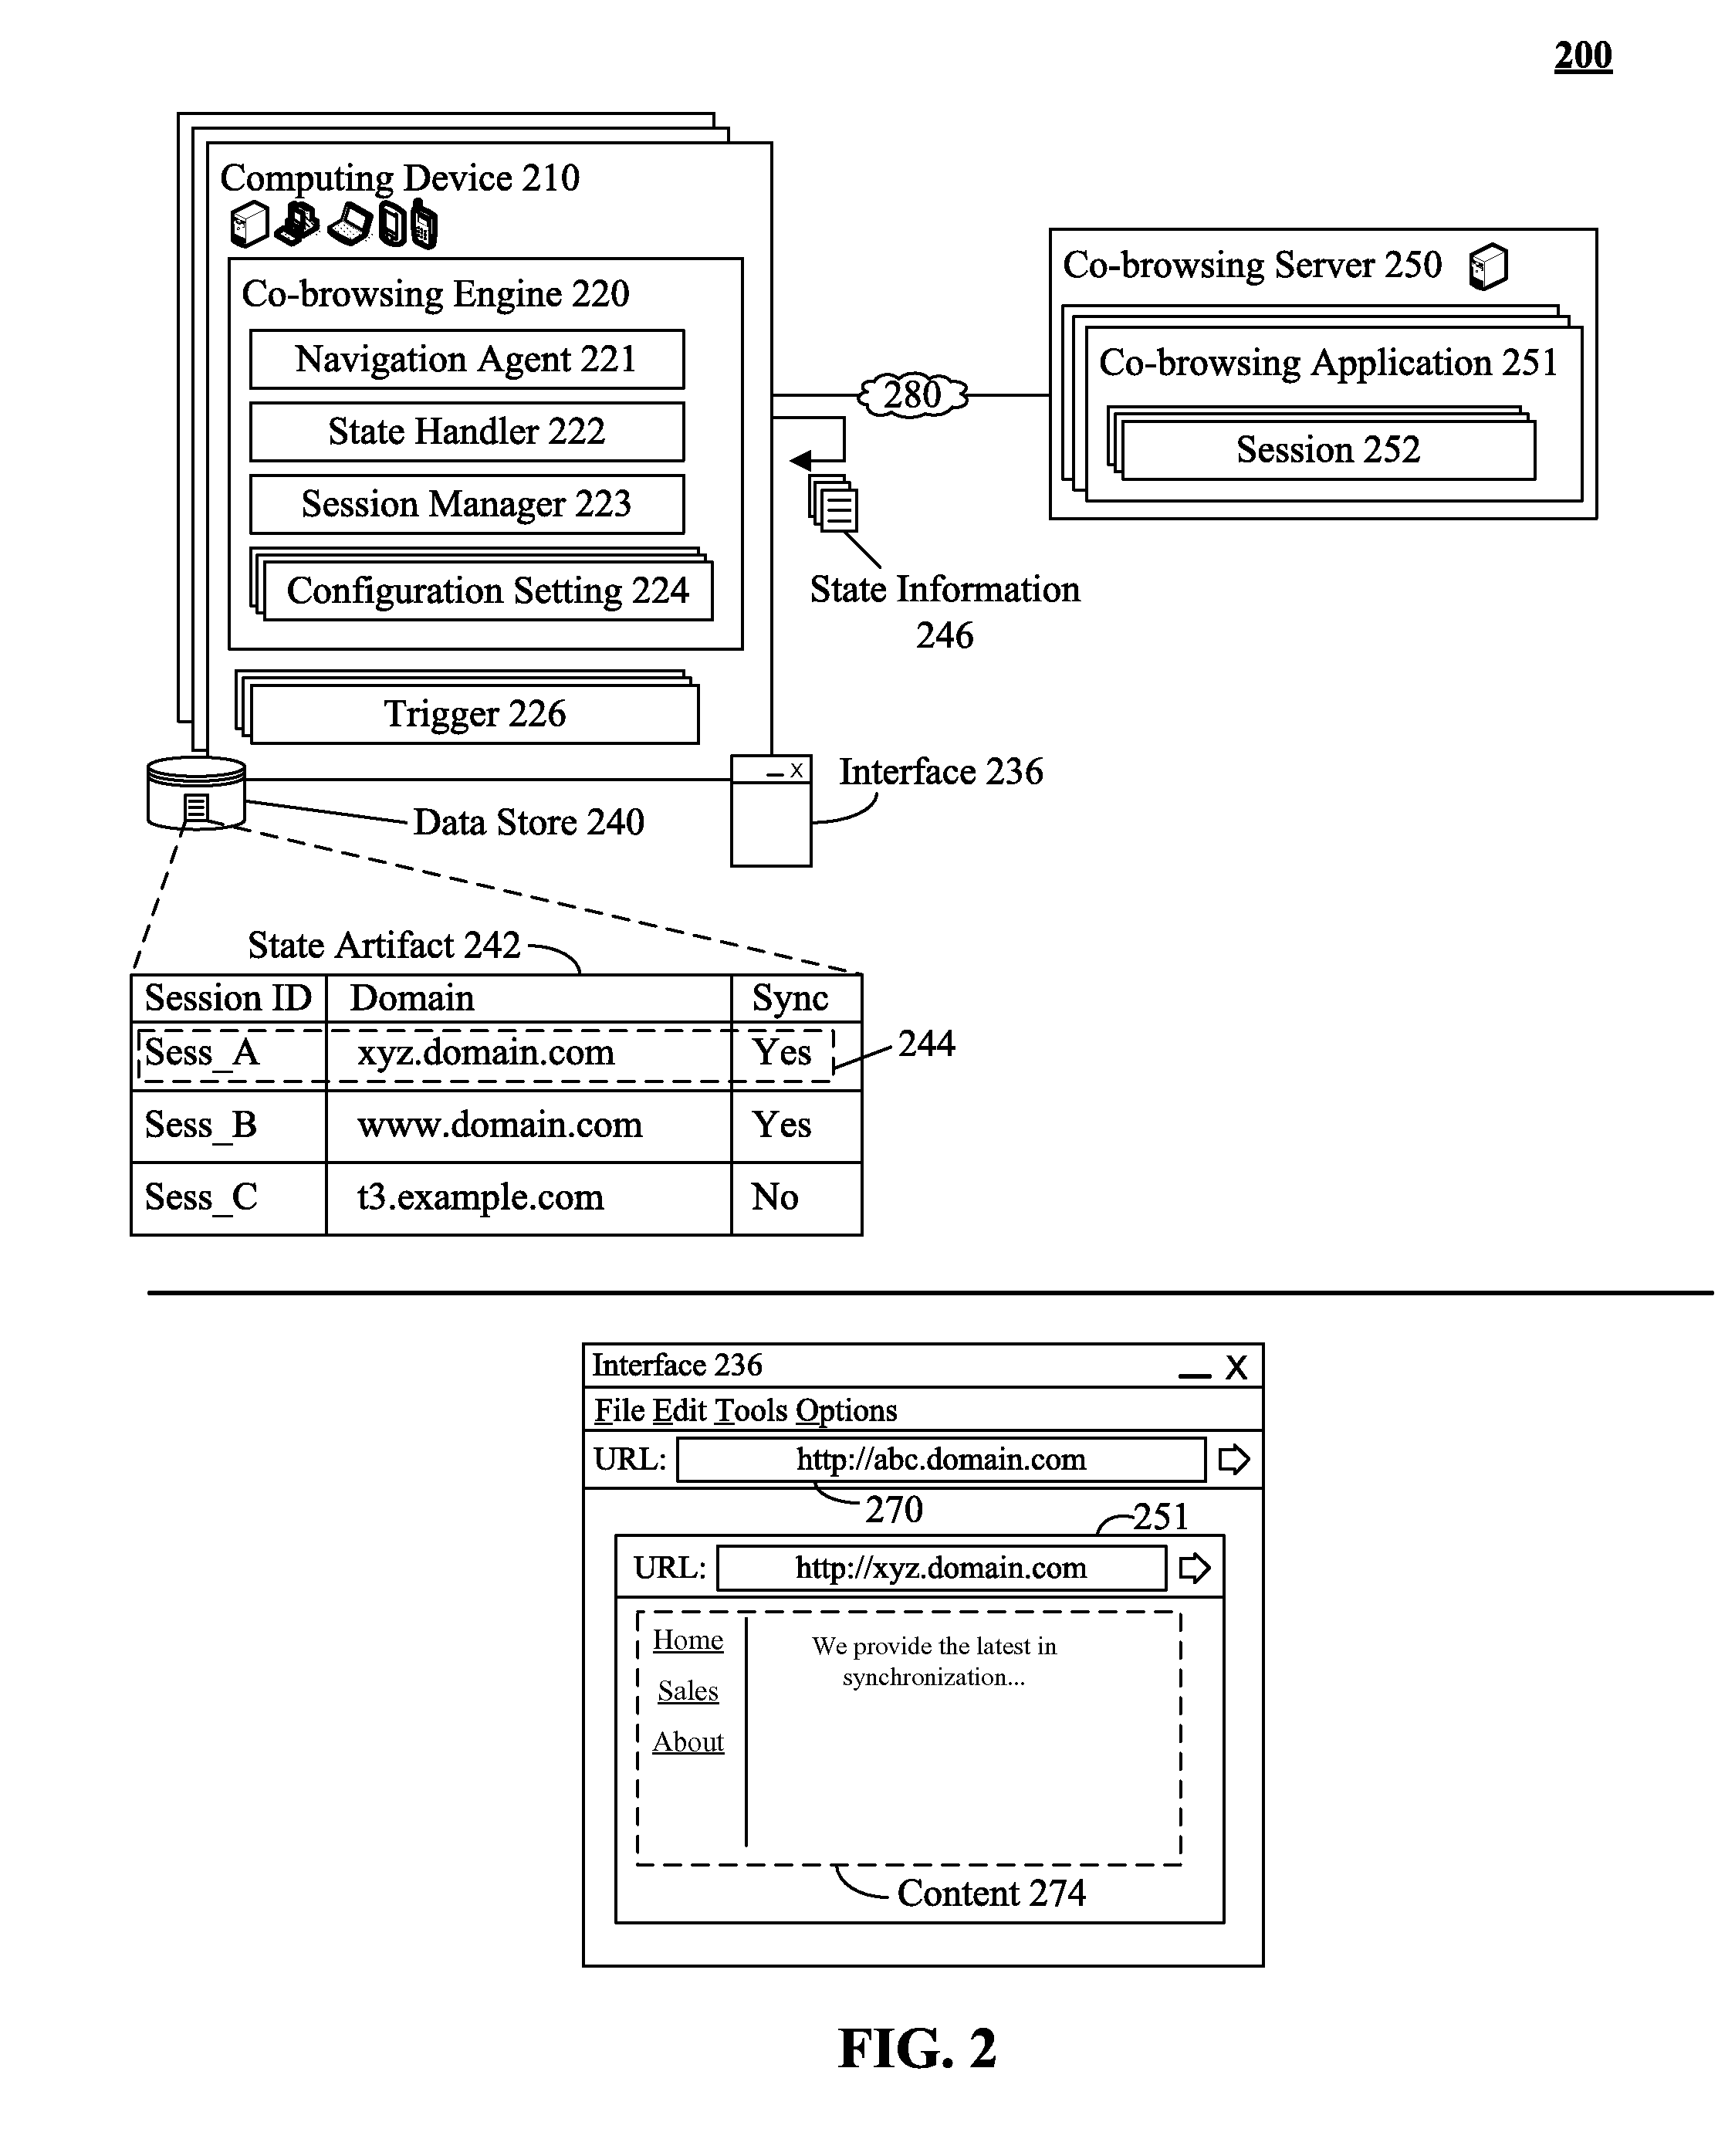 Multi-domain co-browsing utilizing localized state management